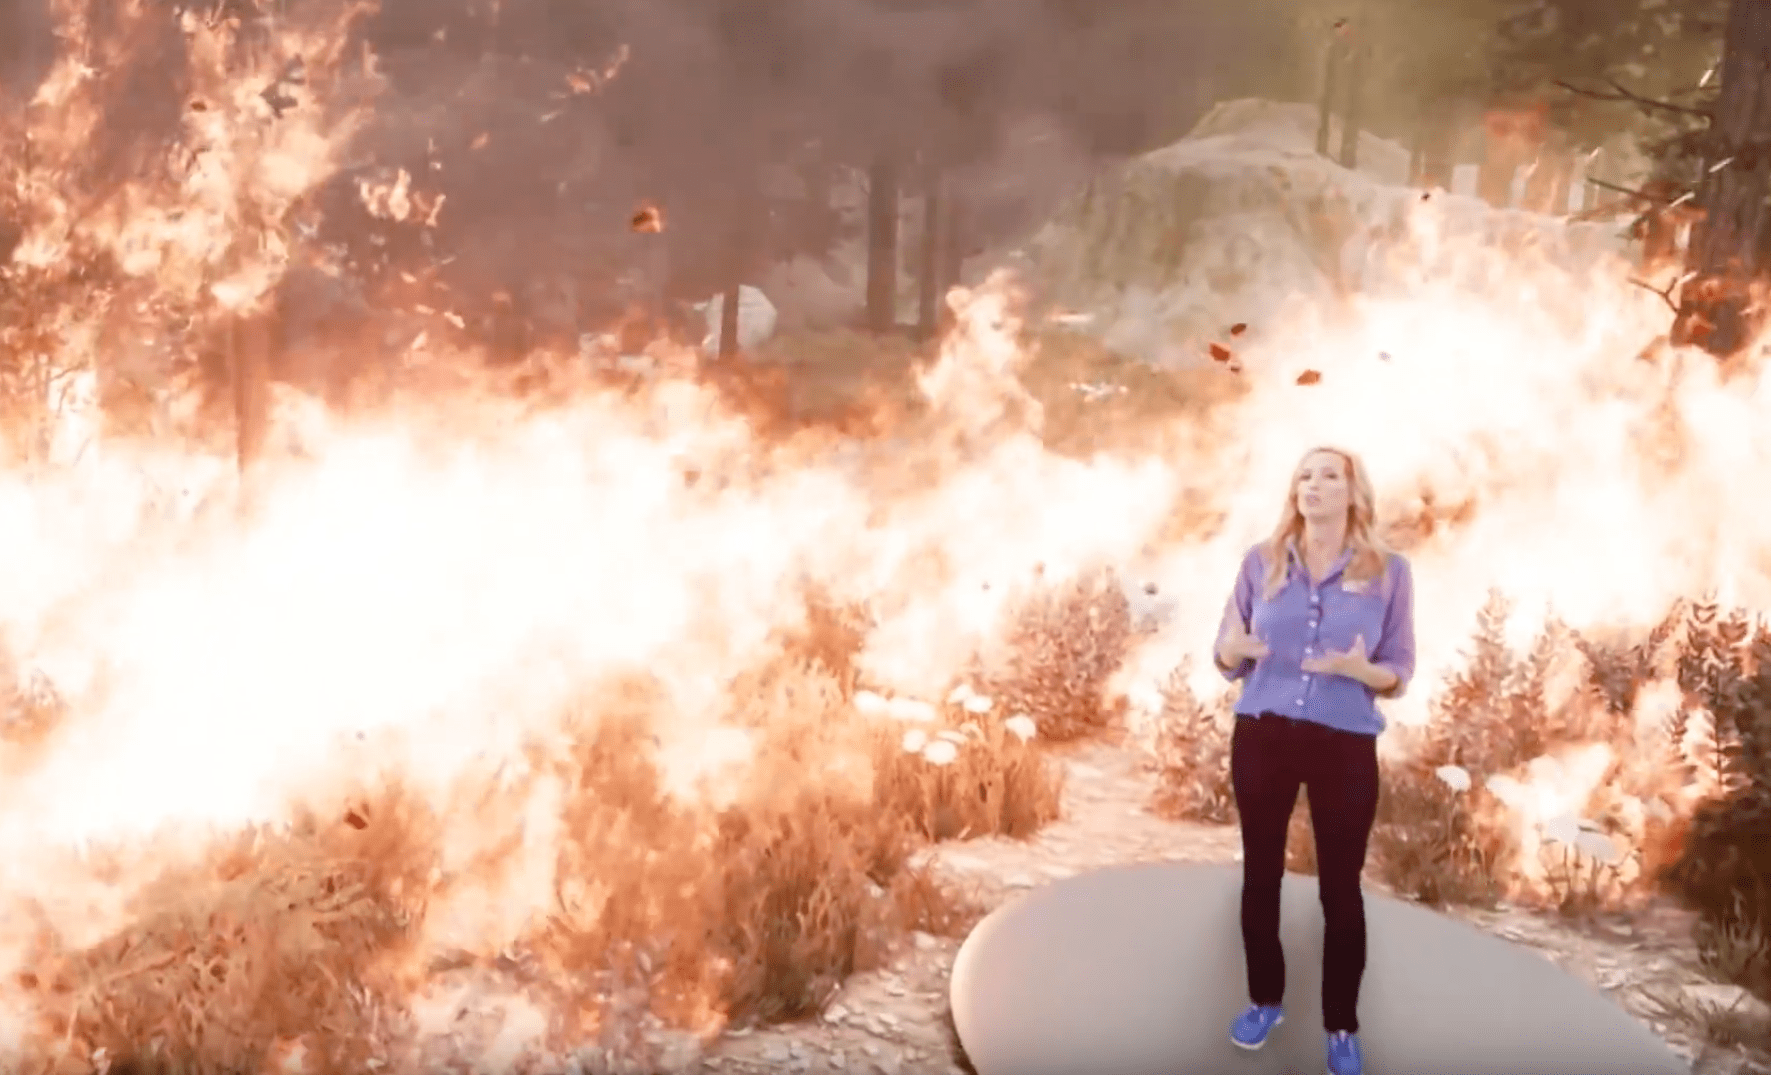 weather channel, wildfire, video